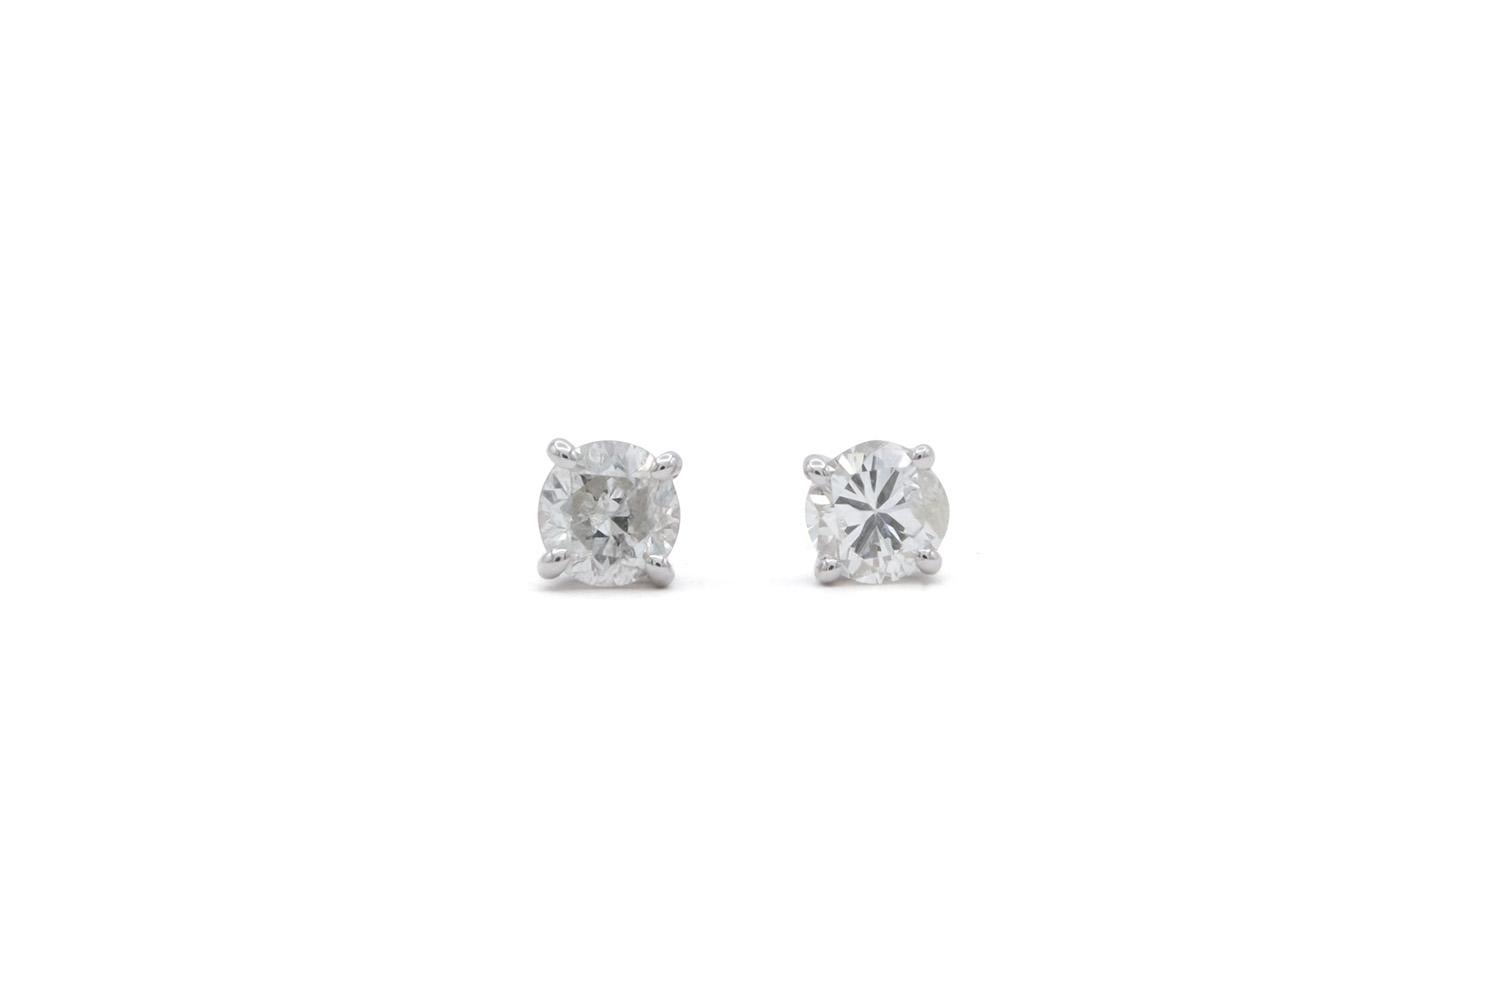 We are pleased to present these 14K White Gold & Diamond Stud Earrings. These beautiful earrings feature 0.71ctw H-I/SI2-I1 Round Brilliant Cut Diamonds set in 14k White Gold studs with slide back setting. The diamonds have lots of sparkle! They are